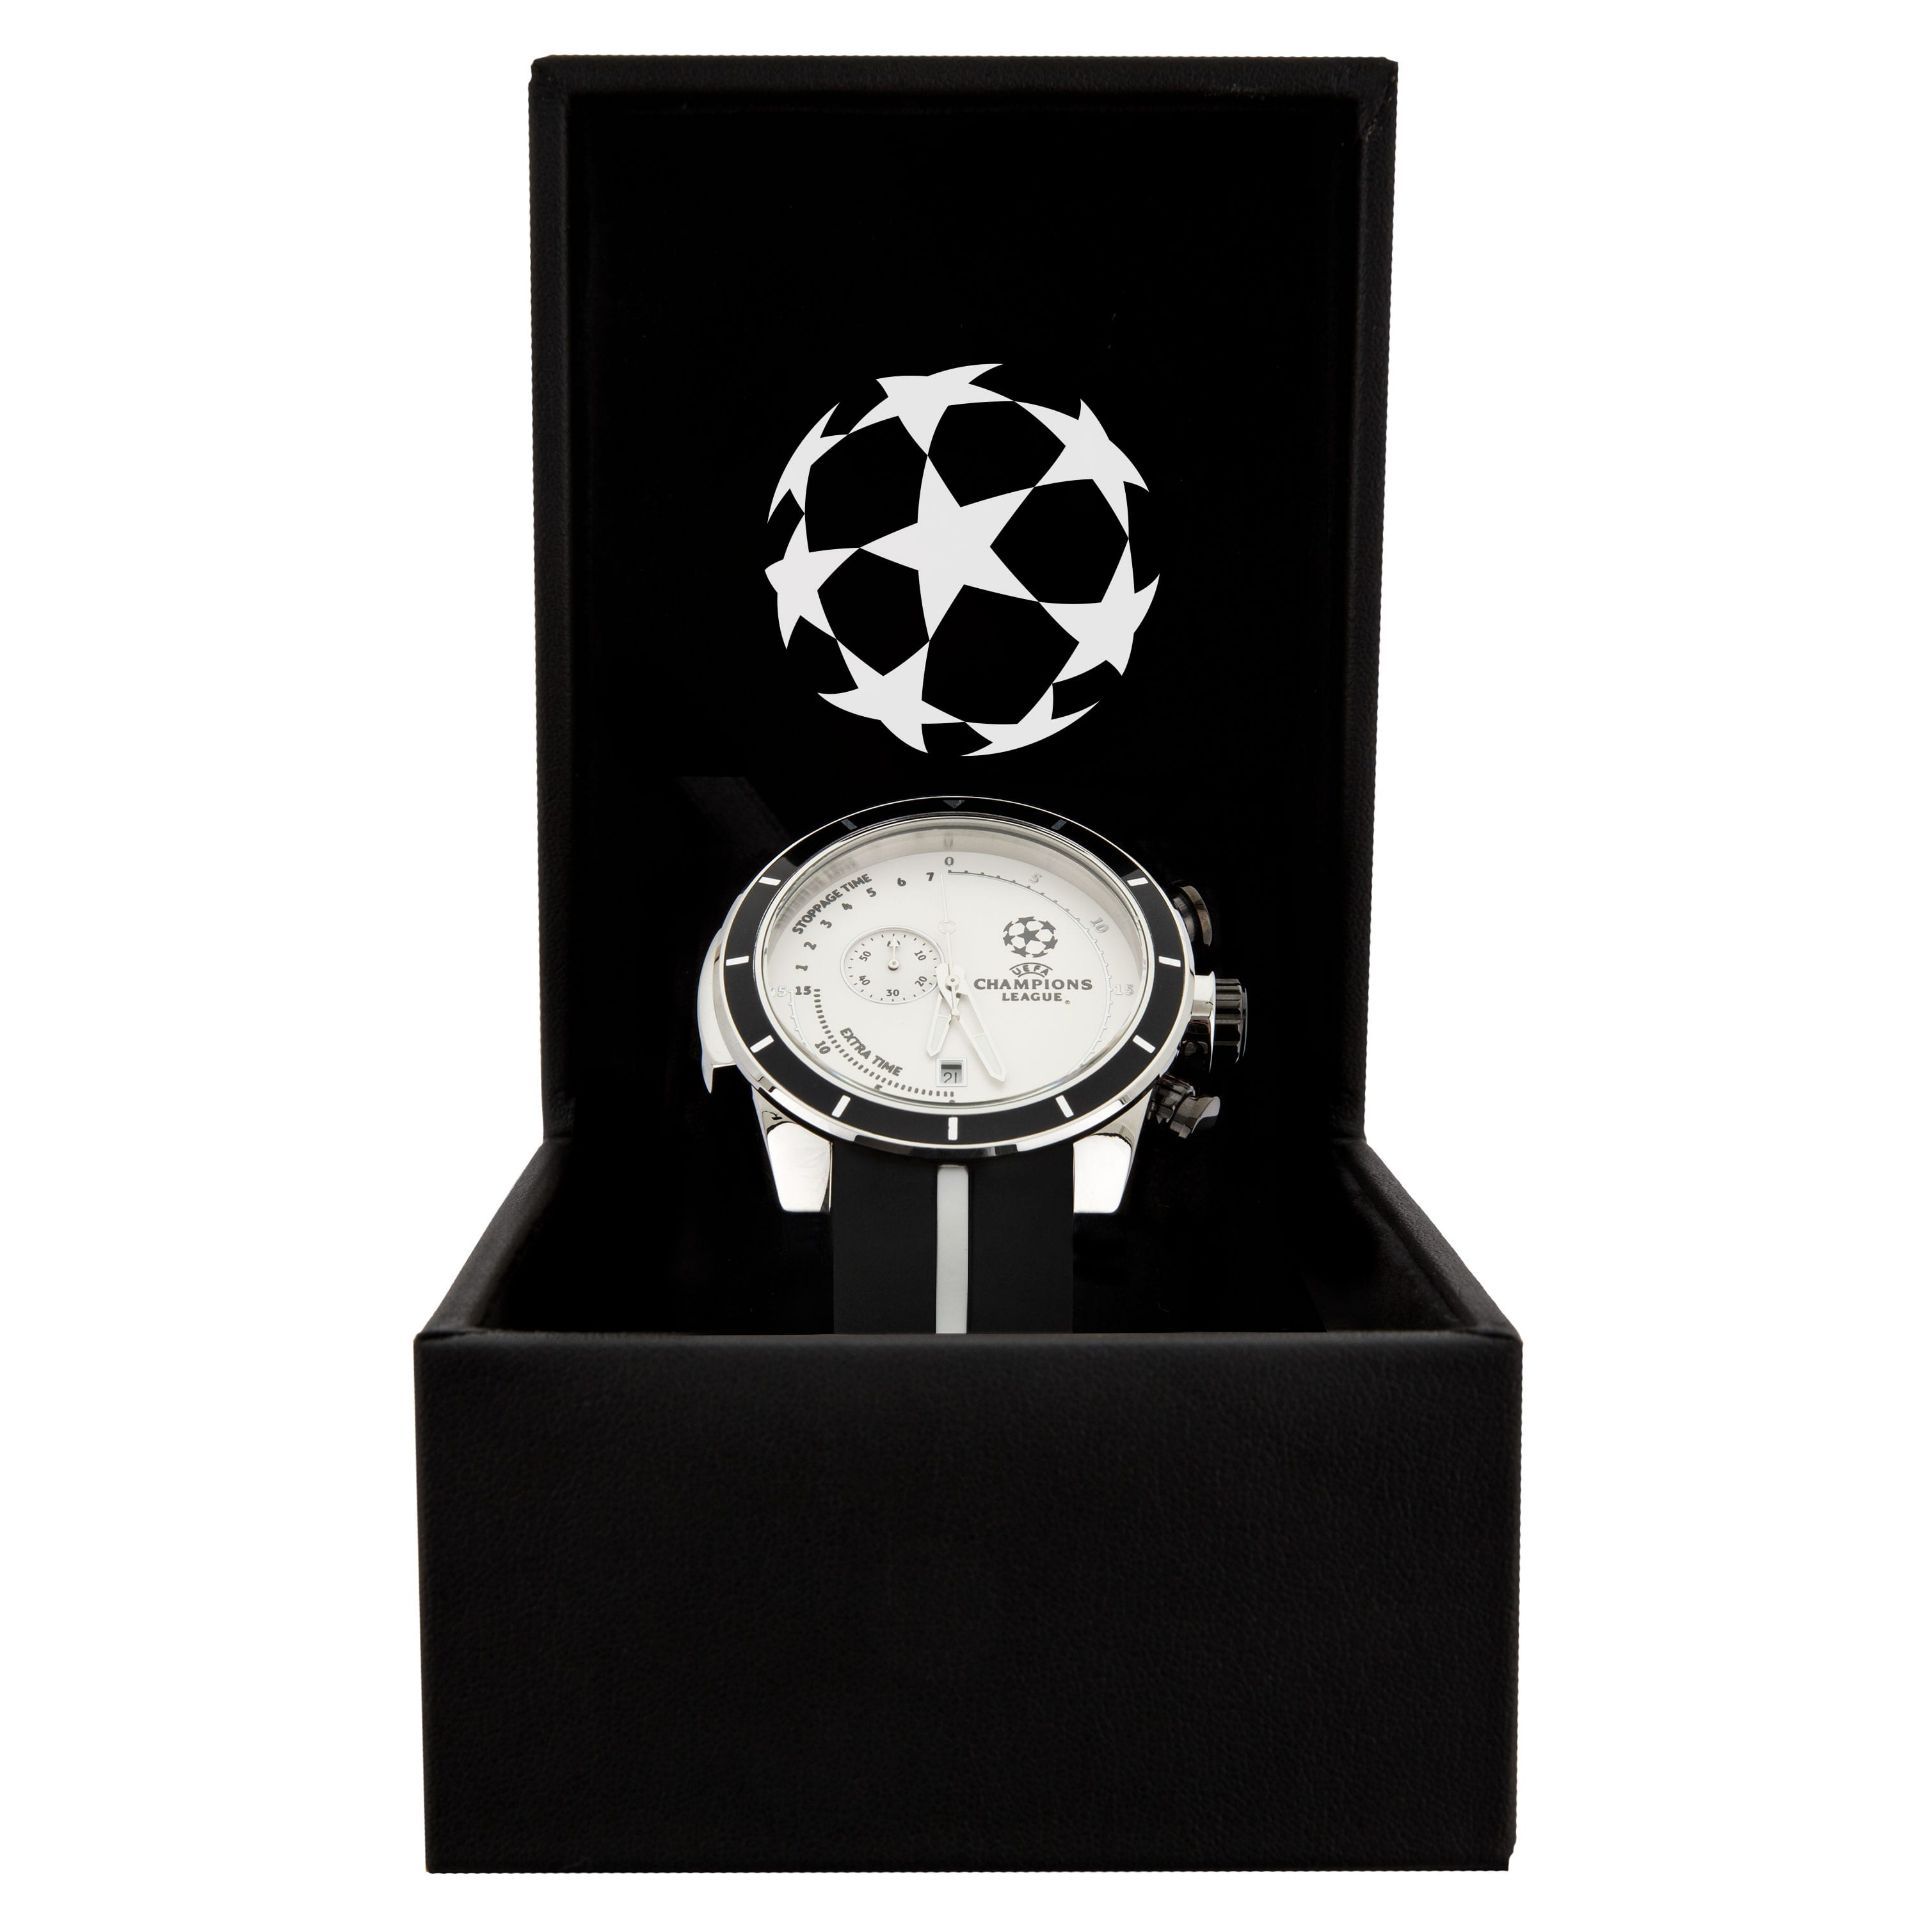 BRAND NEW OFFICIAL UEFA CHAMPIONS LEAGUE 45 MINUTES COUNTDOWN WATCH CL45-STB-BLGRP, RRP £225 - Image 4 of 5